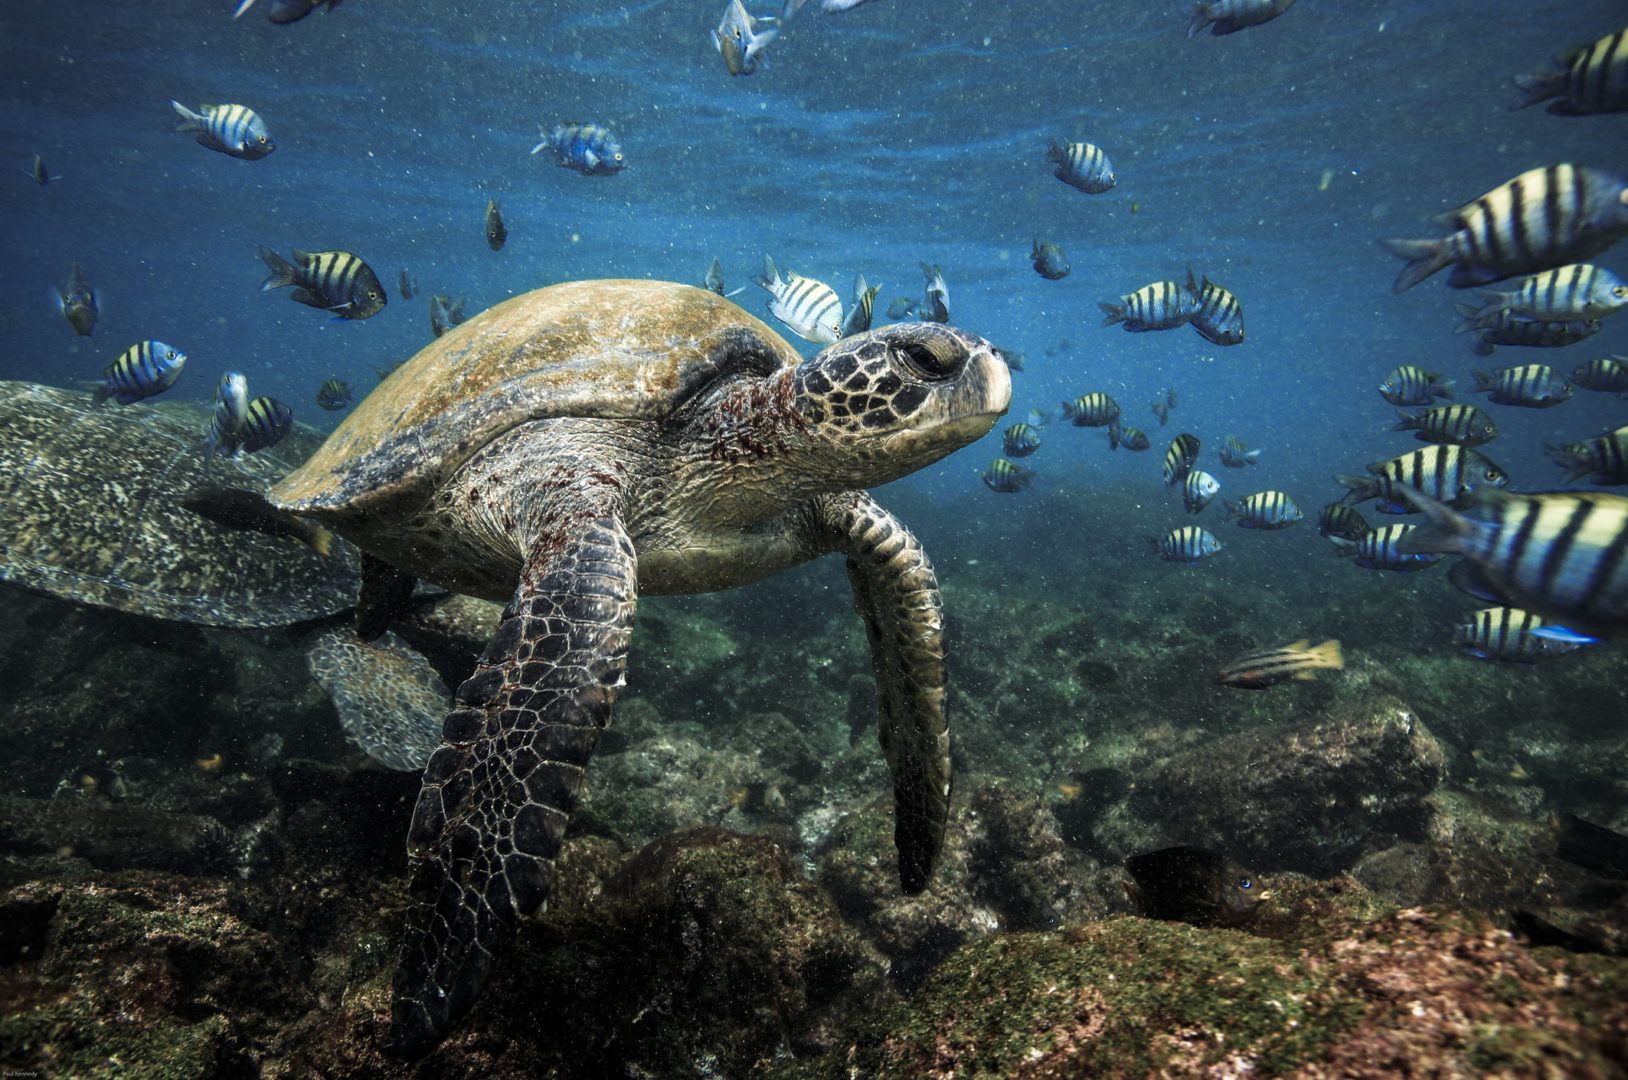 Fun Animals You Might See While Snorkeling in the Gulf Coast